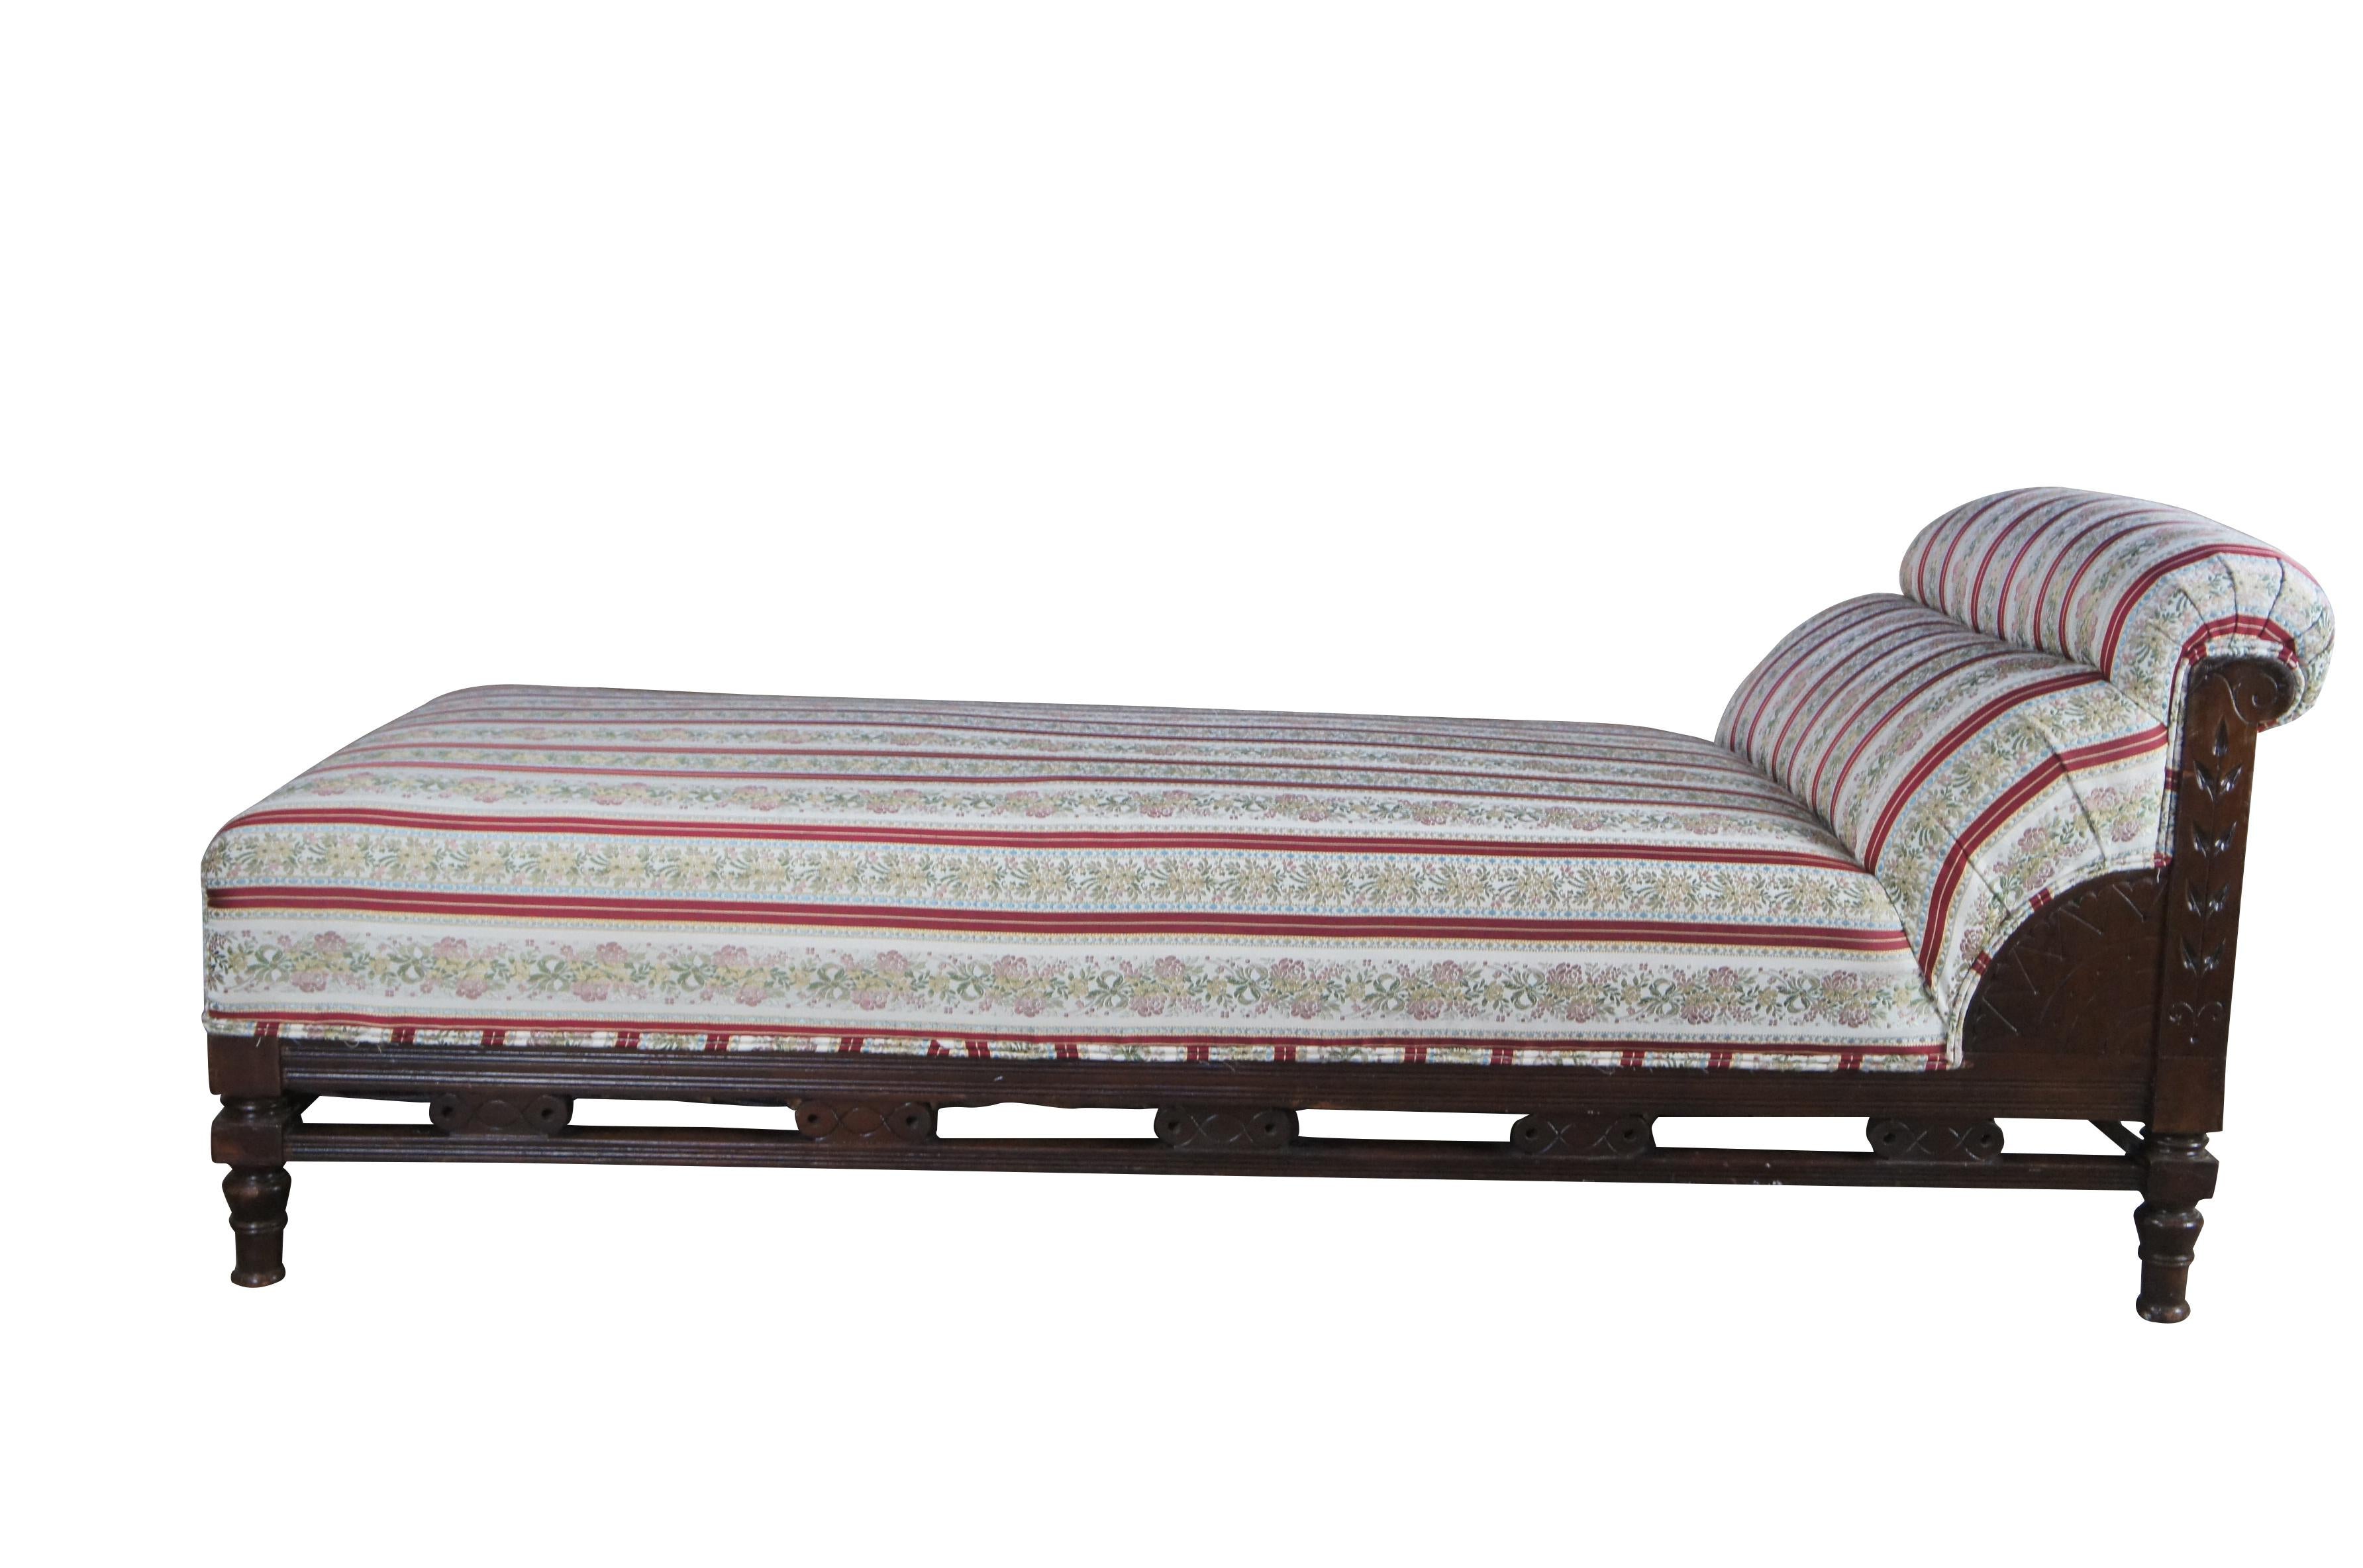 Antique Victorian parlor day bed / fainting couch / chaise lounge.  Made of mahogany featuring traditional Eastlake styling with pierced / reticulated frame and Neoclassical striped floral and ribbon fabric with double cording.  A very comfy and